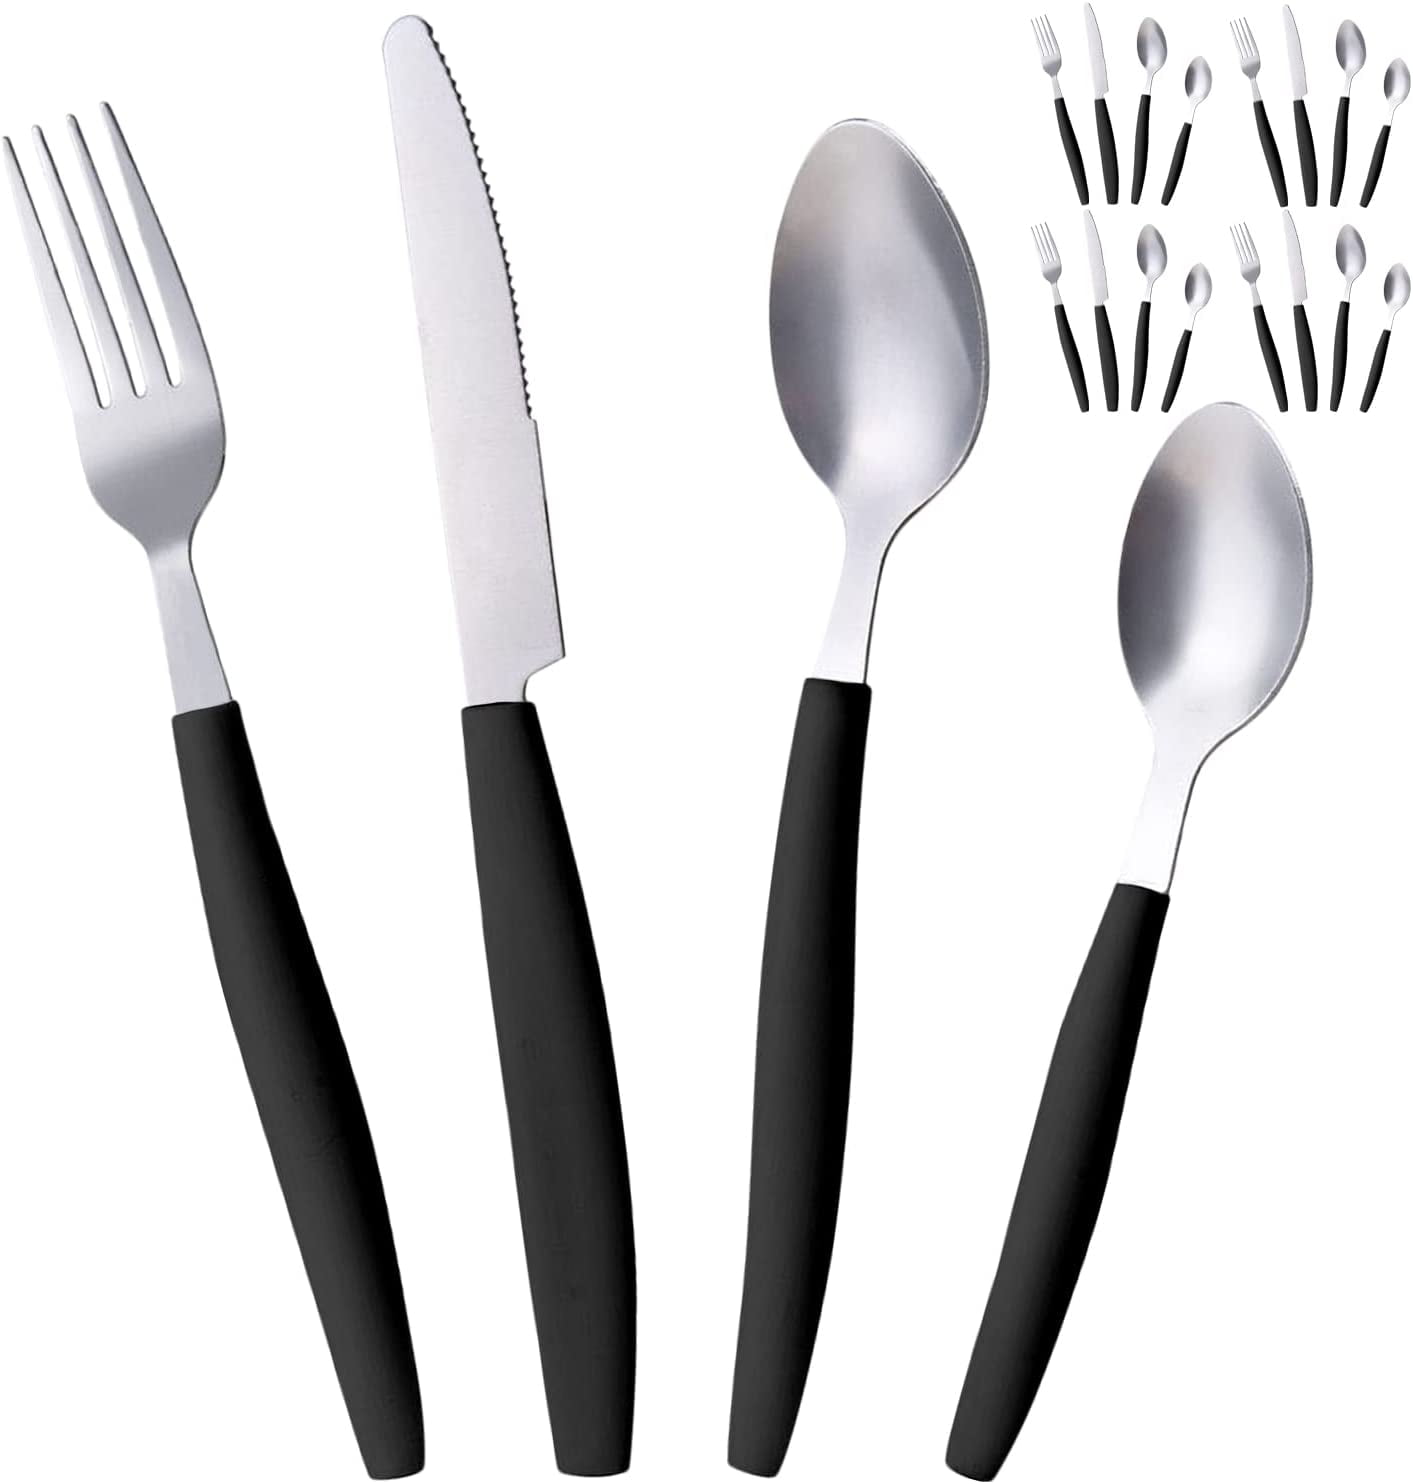 Alpine Cuisine Stainless Steel Cutlery Set 5 Piece with Green POM Hand